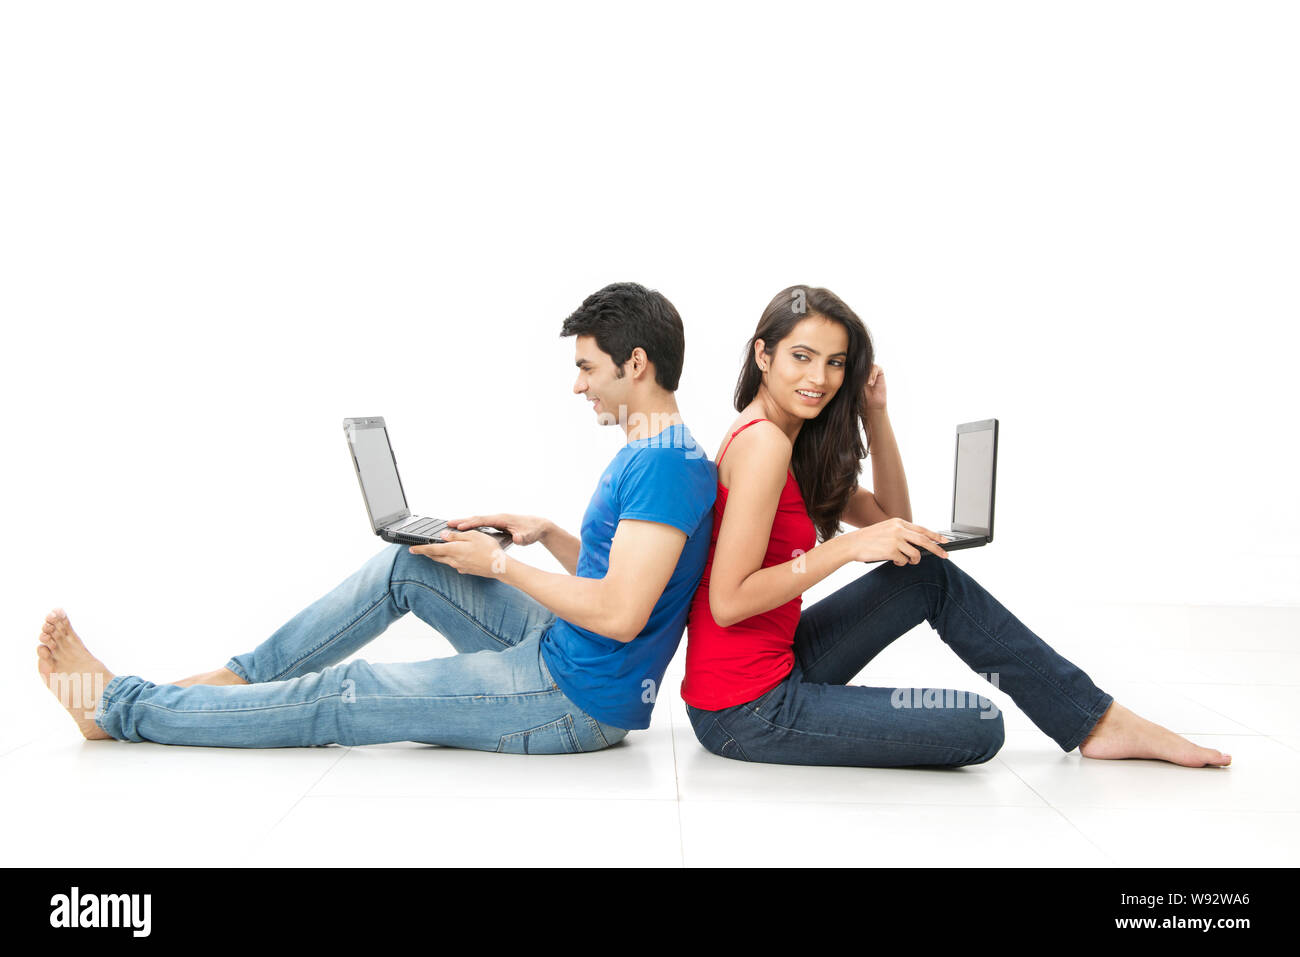 Young couple sitting on floor back to back and using laptops Stock Photo